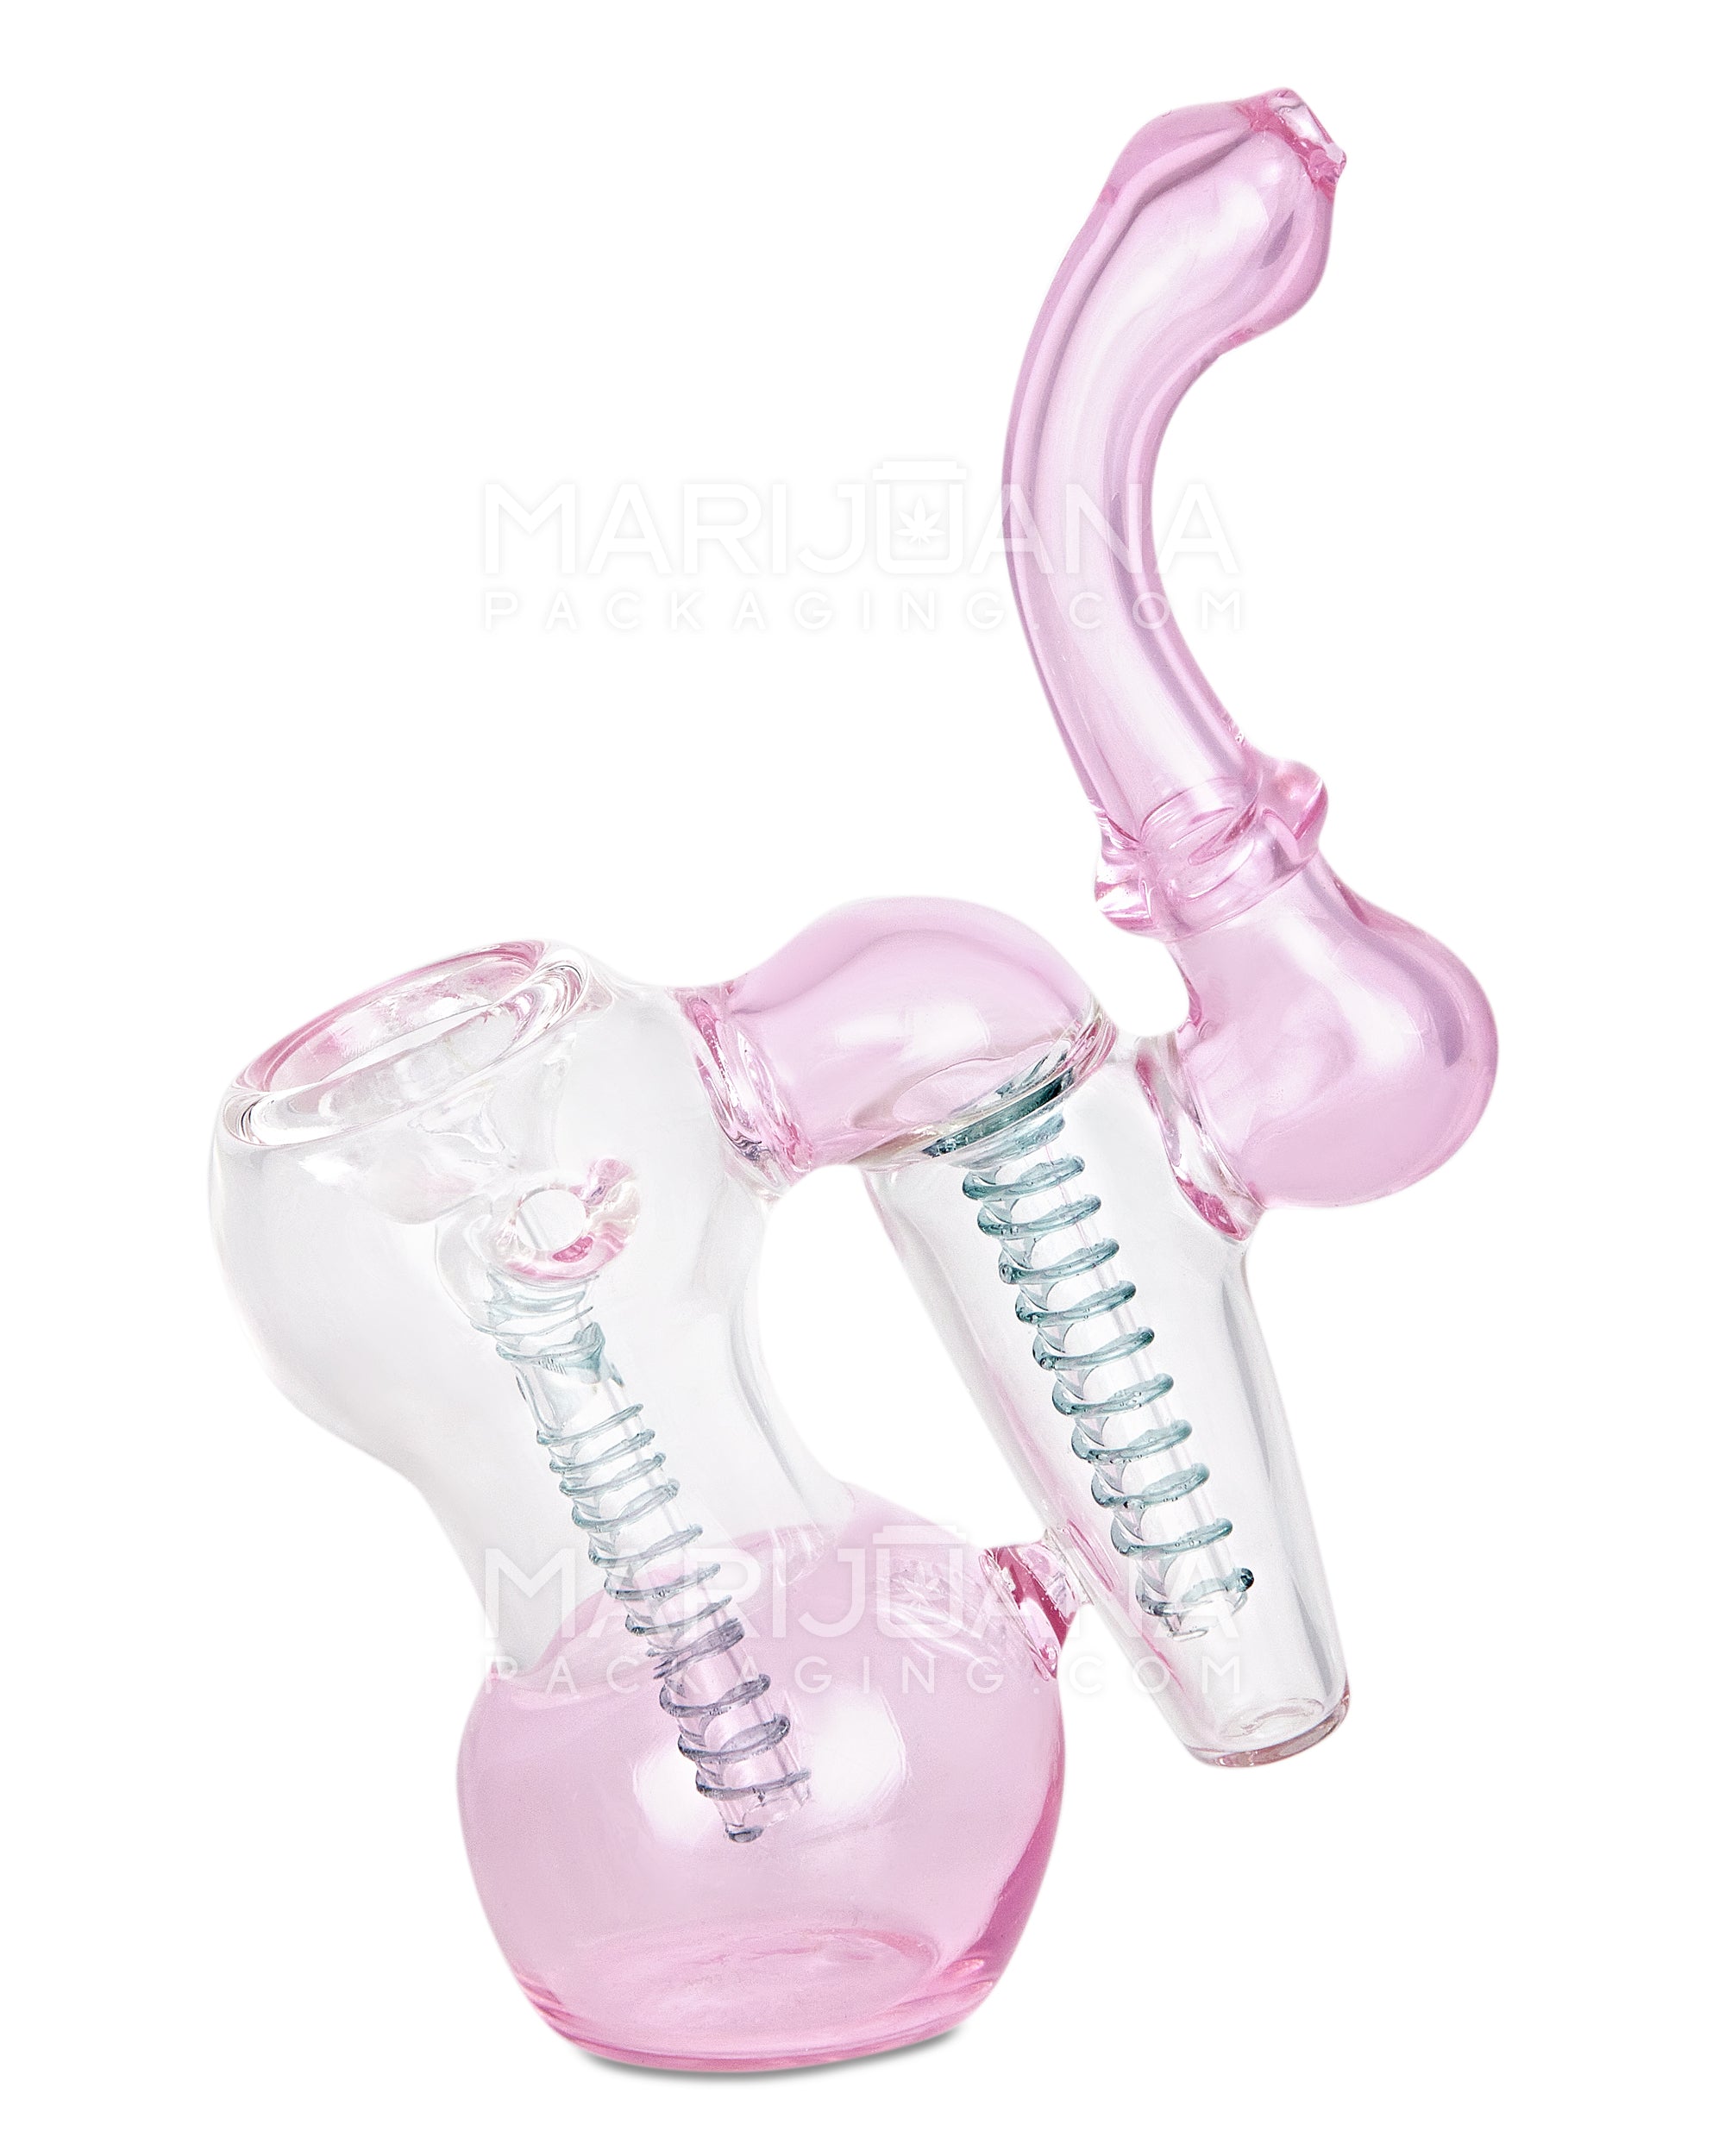 Ringed Double Chamber Bubbler w/ Multi Knockers | 7.5in Tall - Glass - Pink - 9